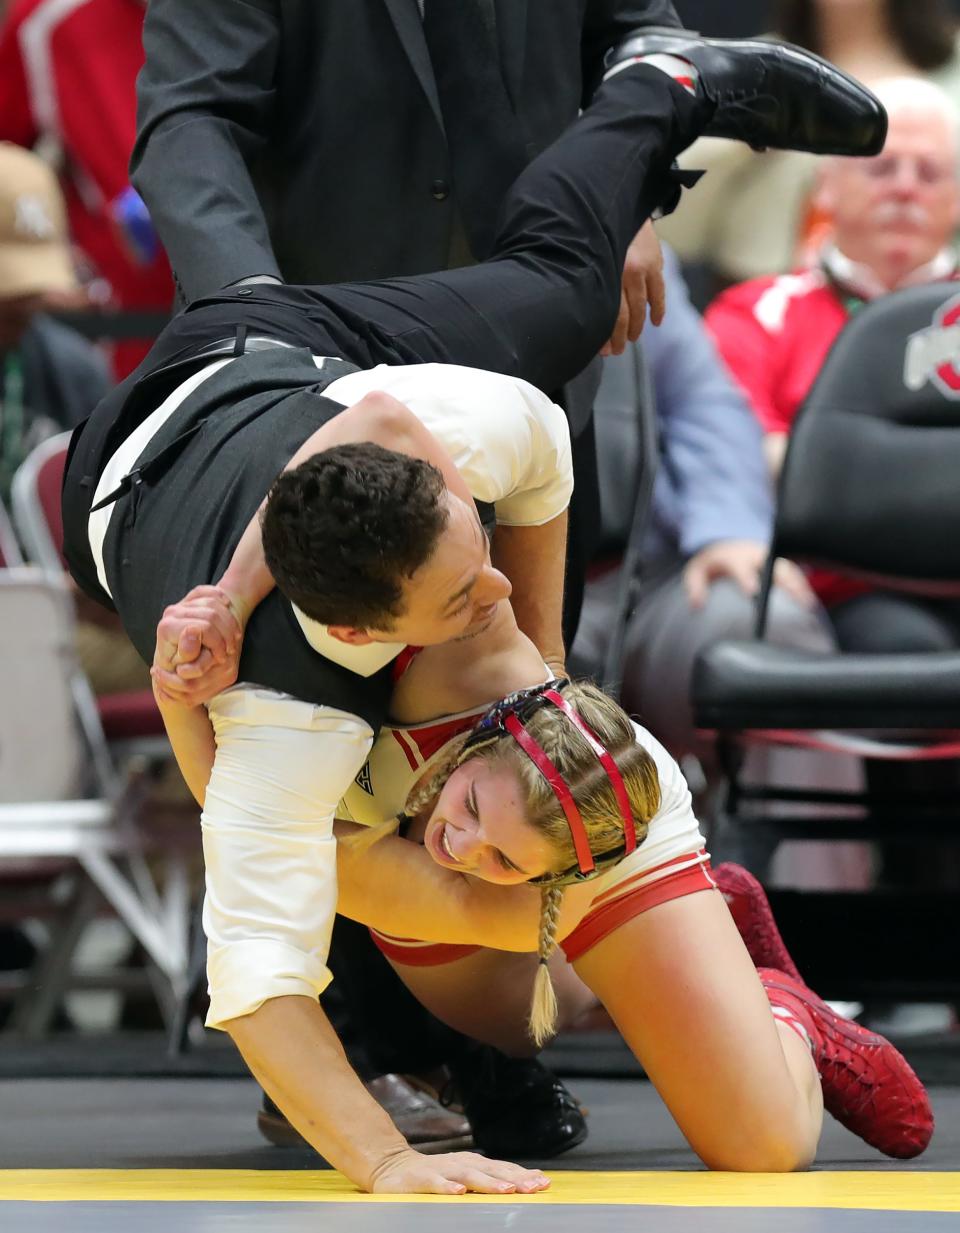 Jaydyn McKinney tosses her coach to the mat after winning the 135 girls championship match in the OHSAA State Wrestling Tournament at the Jerome Schottenstein Center, Sunday, March 12, 2023, in Columbus, Ohio.